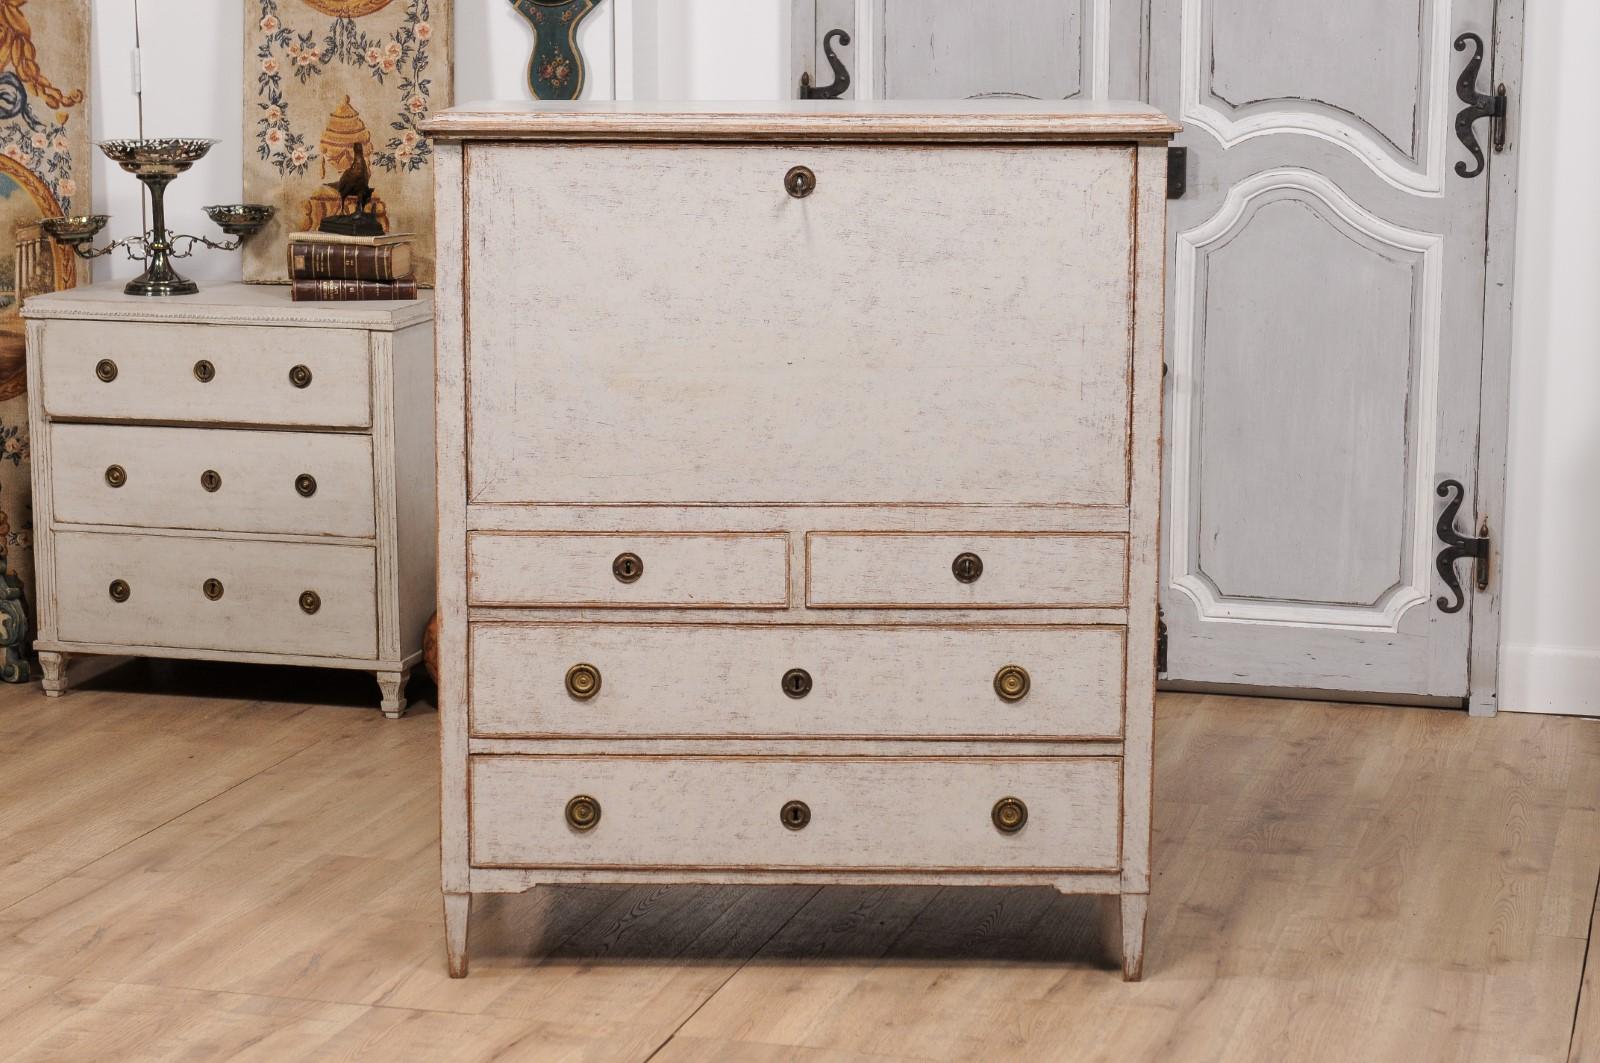 1780s Gustavian Period Swedish Grey Painted Drop-Front Secretary with Drawers In Good Condition For Sale In Atlanta, GA